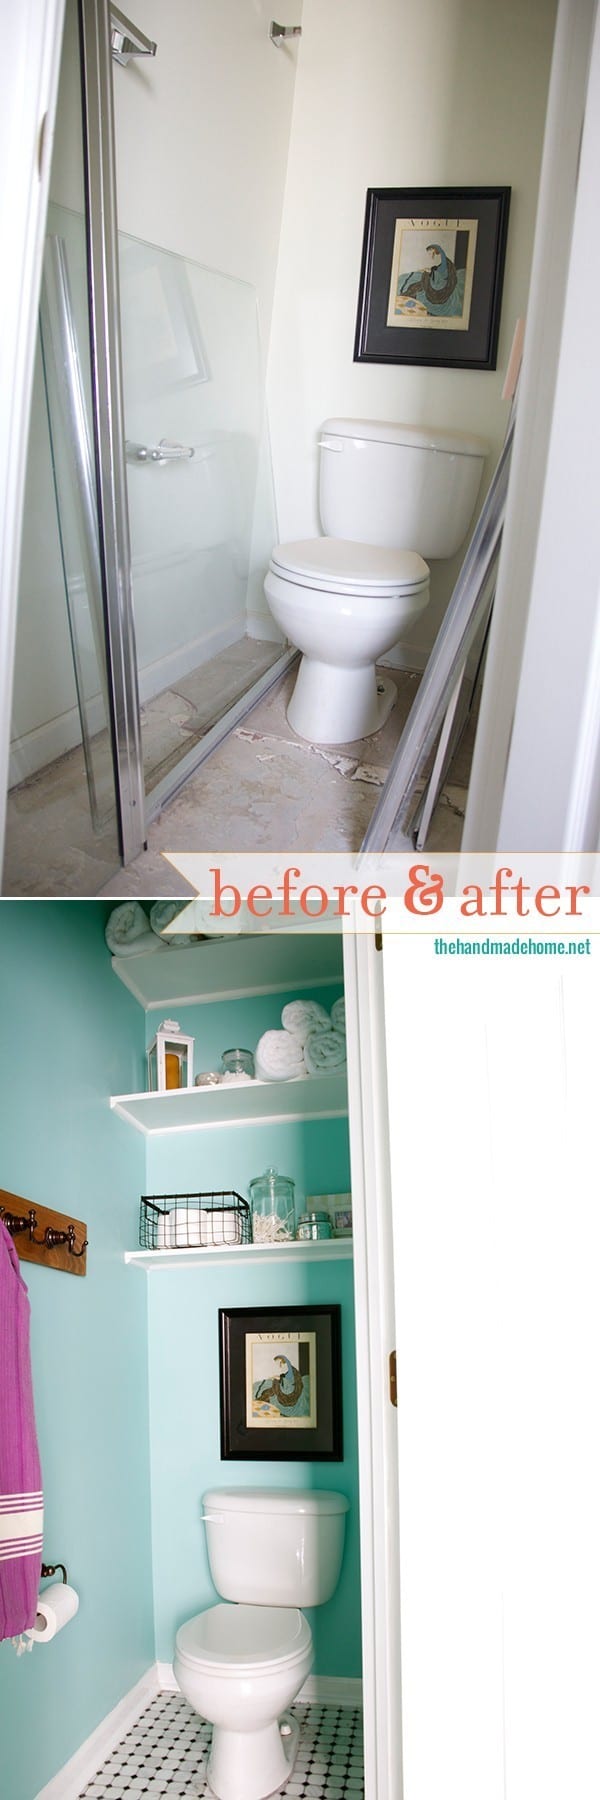 before_and_after_bathroom_redo2